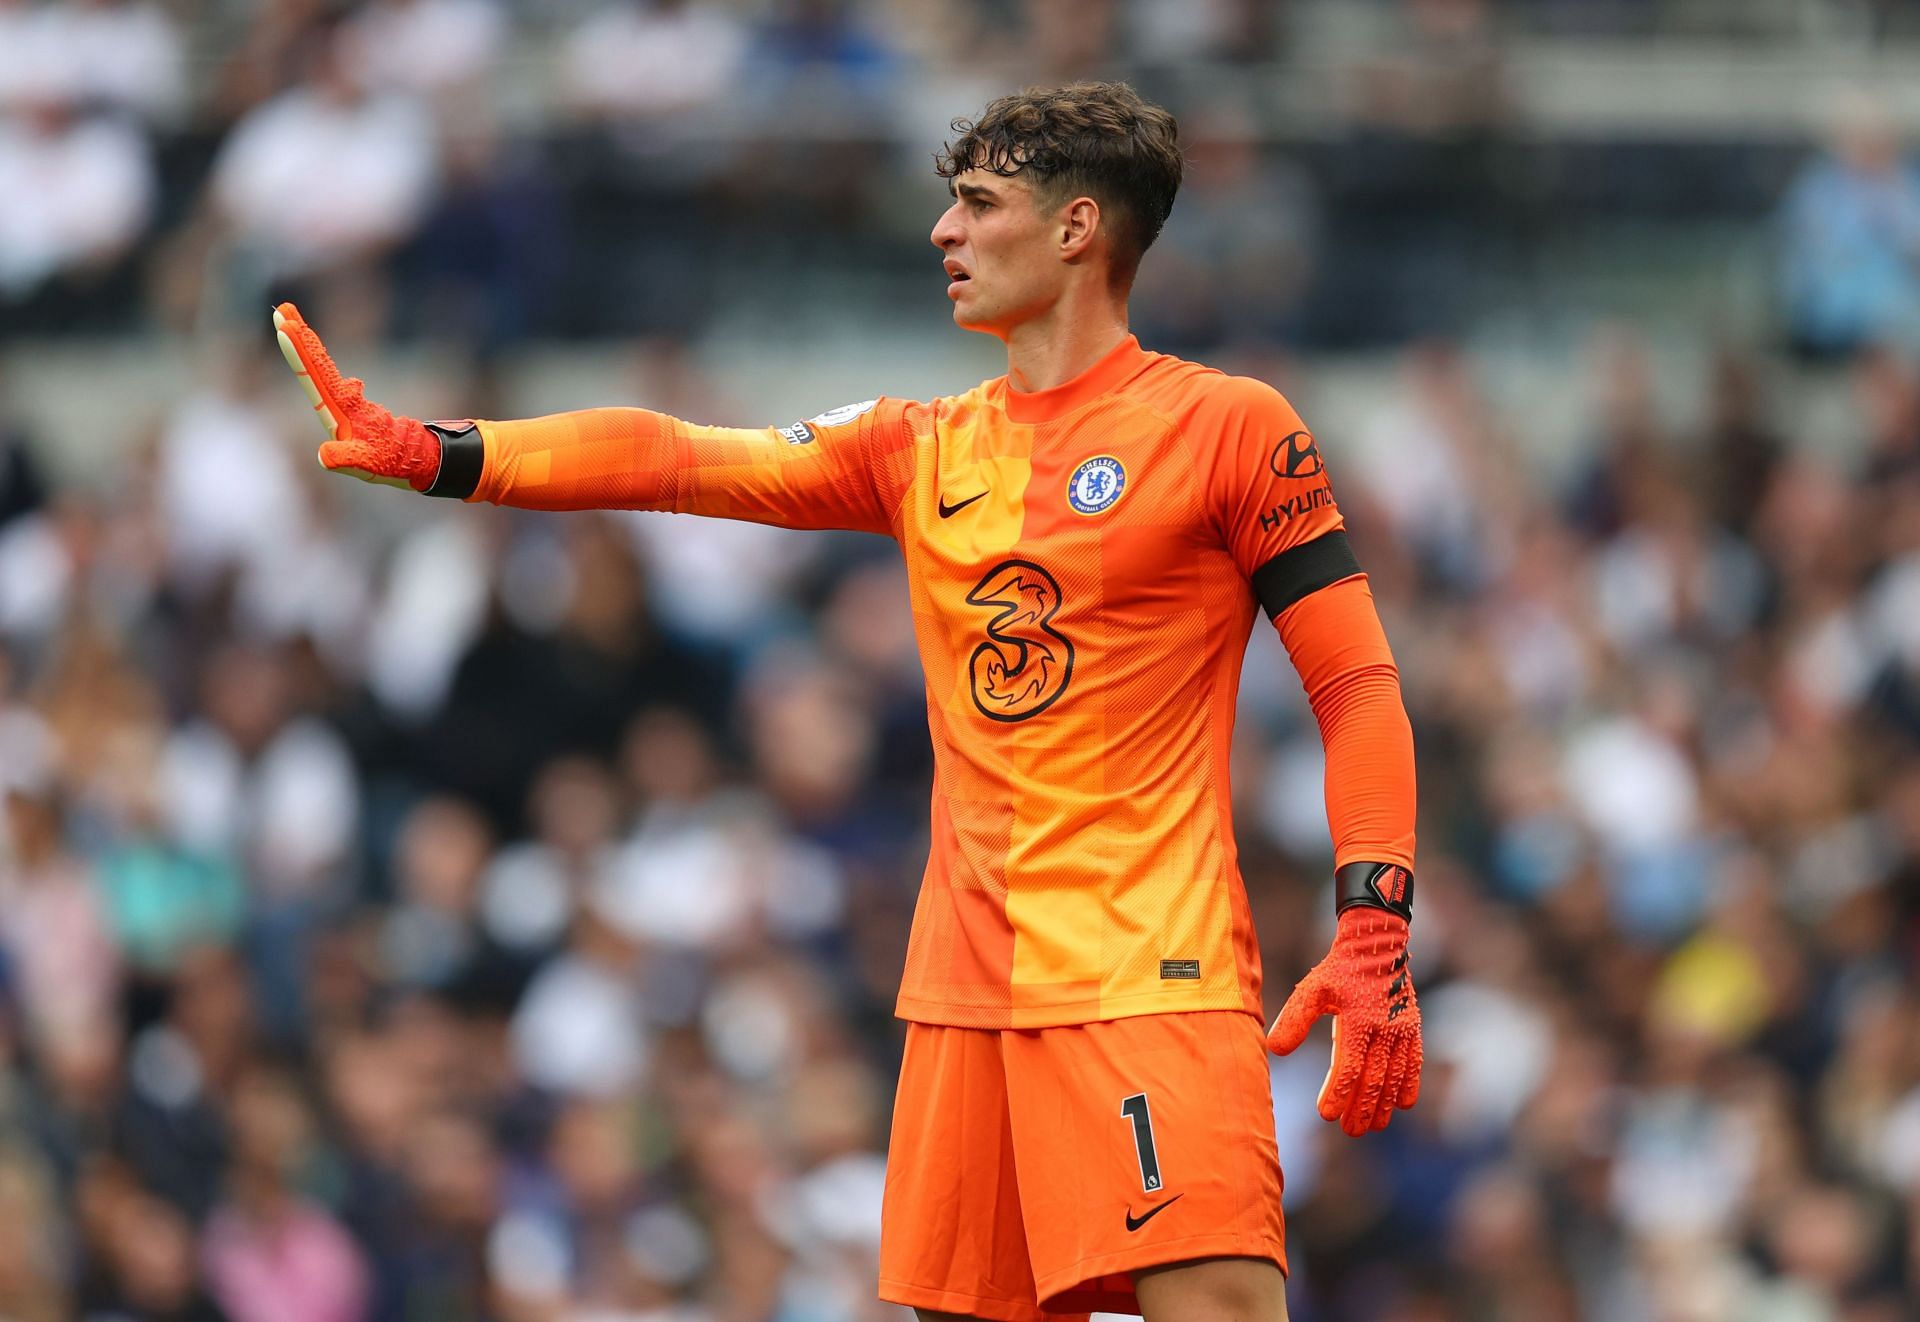 Kepa Arizzabalaga has failed to step up in recent games